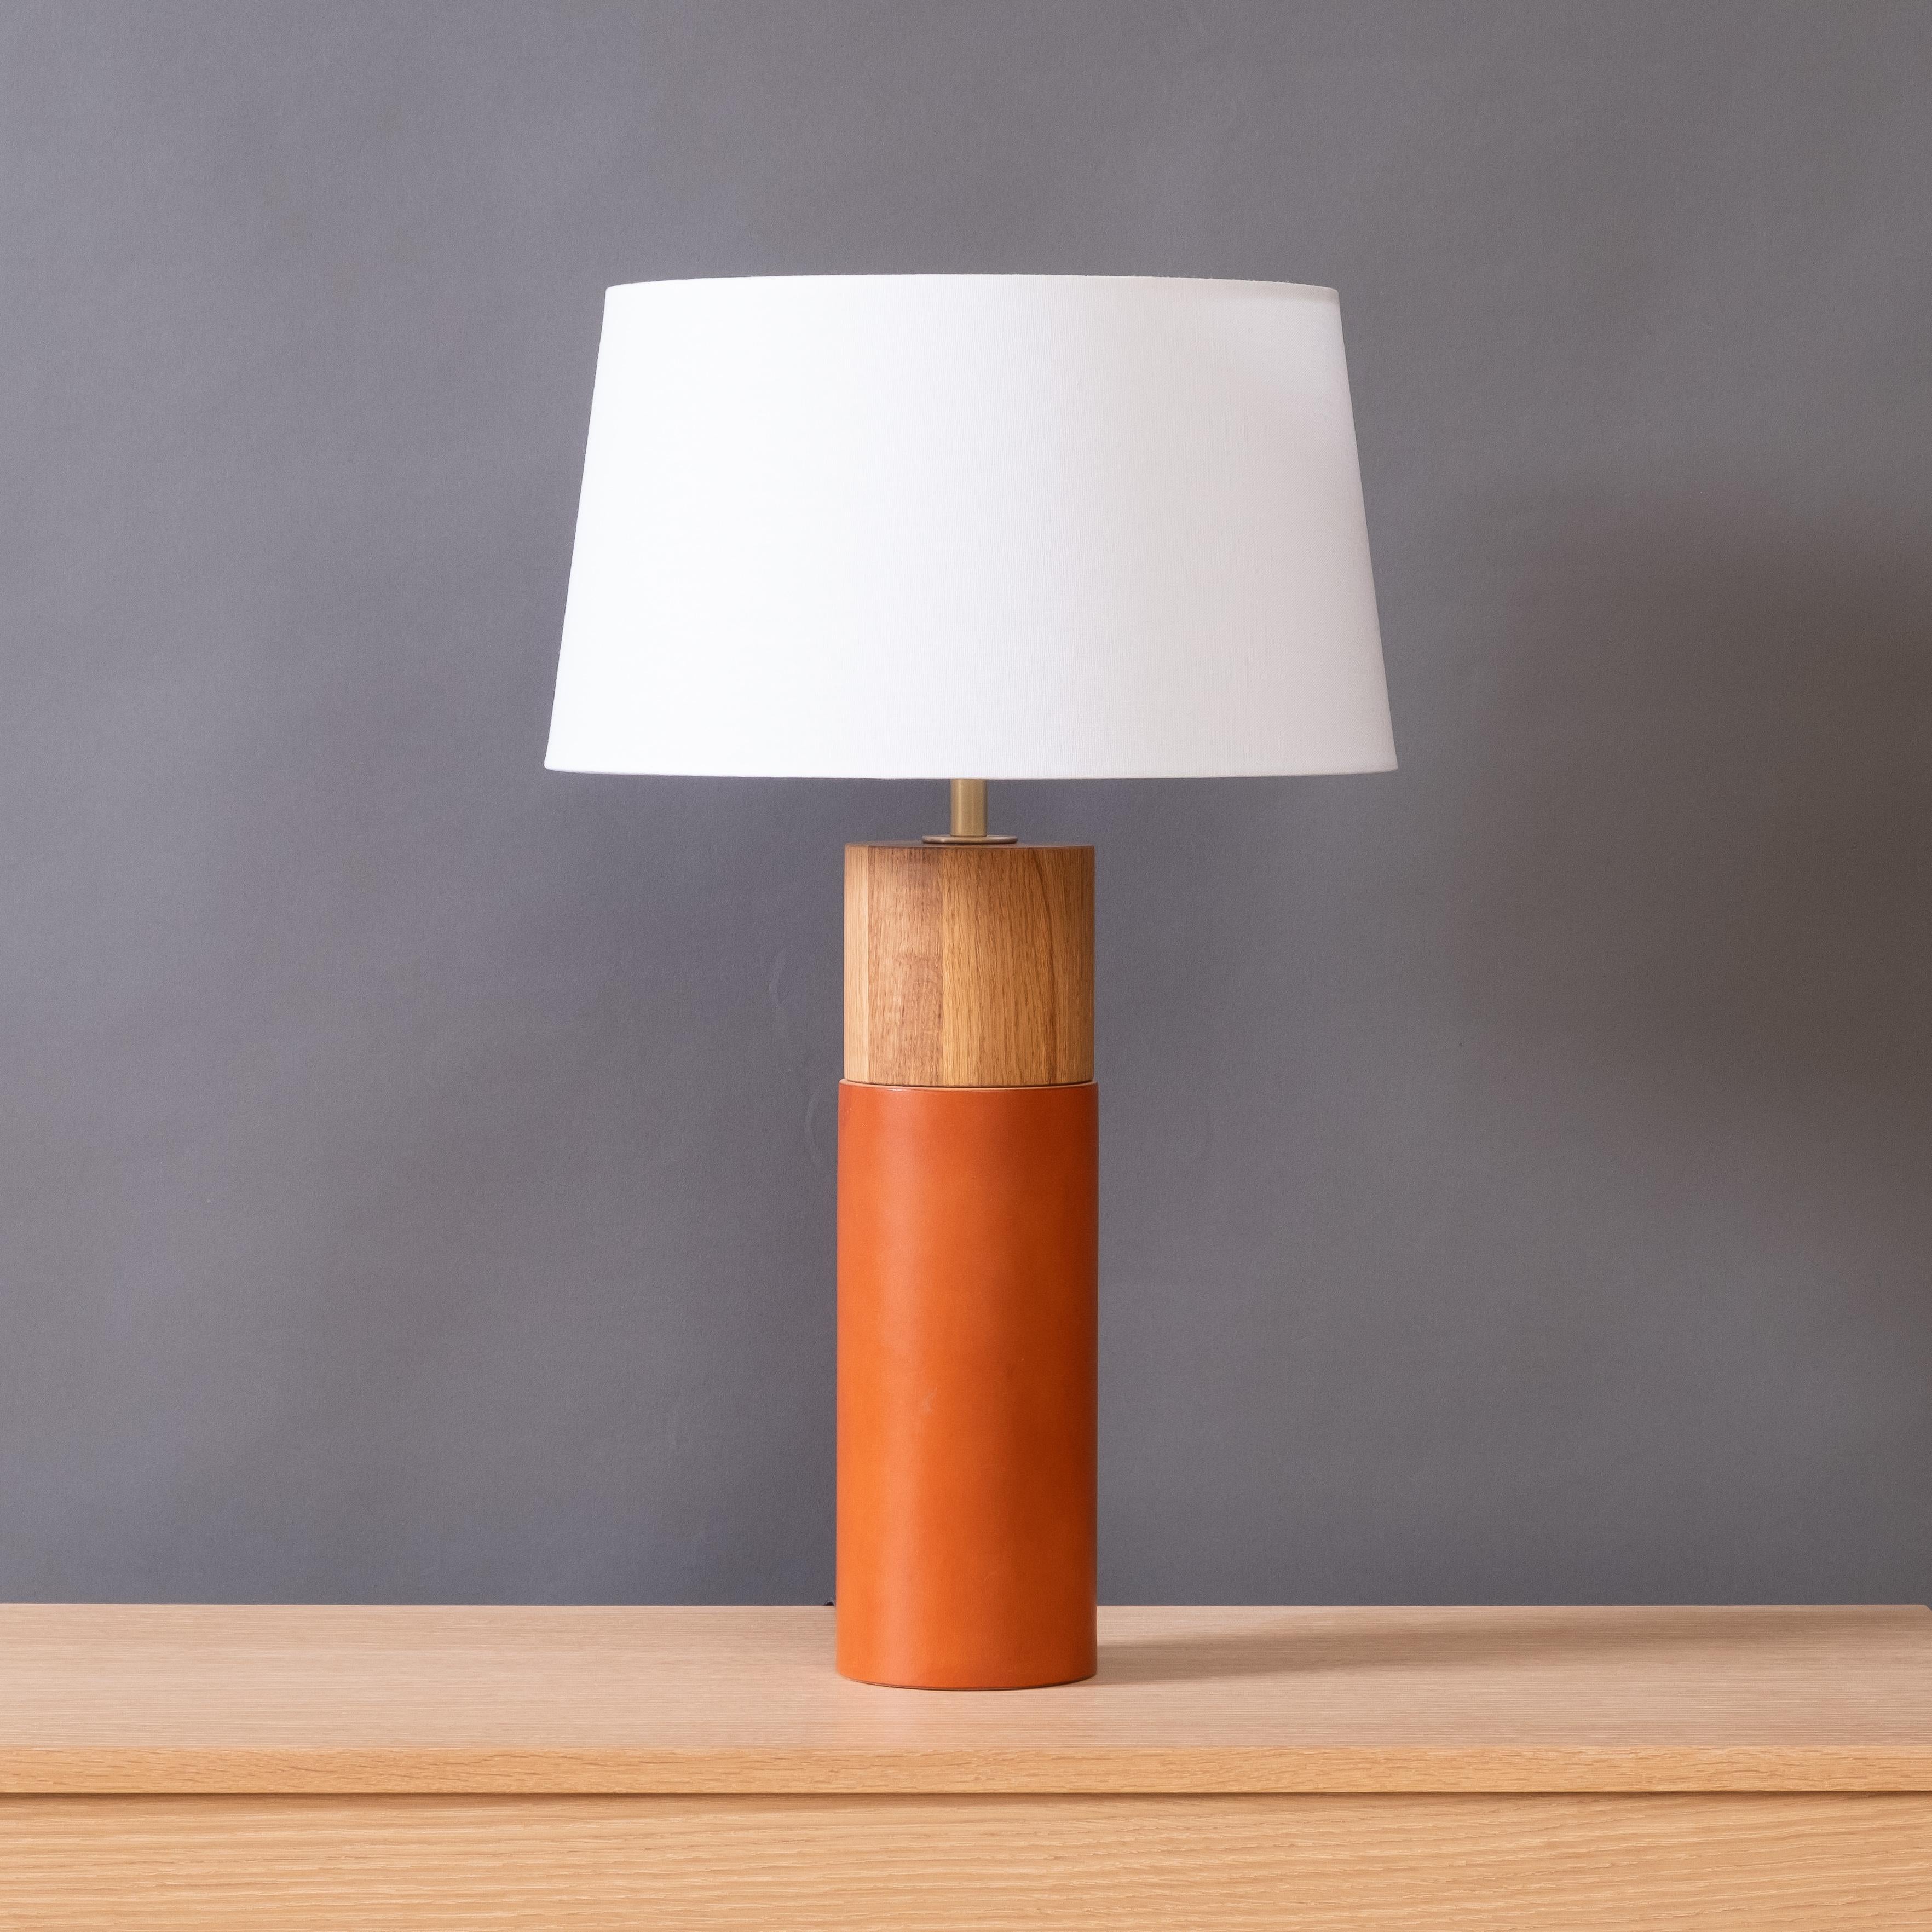 The Capsule table lamp combines minimalist forms with richly textured natural materials. Thick English Bridle leather wraps the lower portion of the turned wood body, contrasting with the oiled wood exposed in the top portion. The satin-finish brass